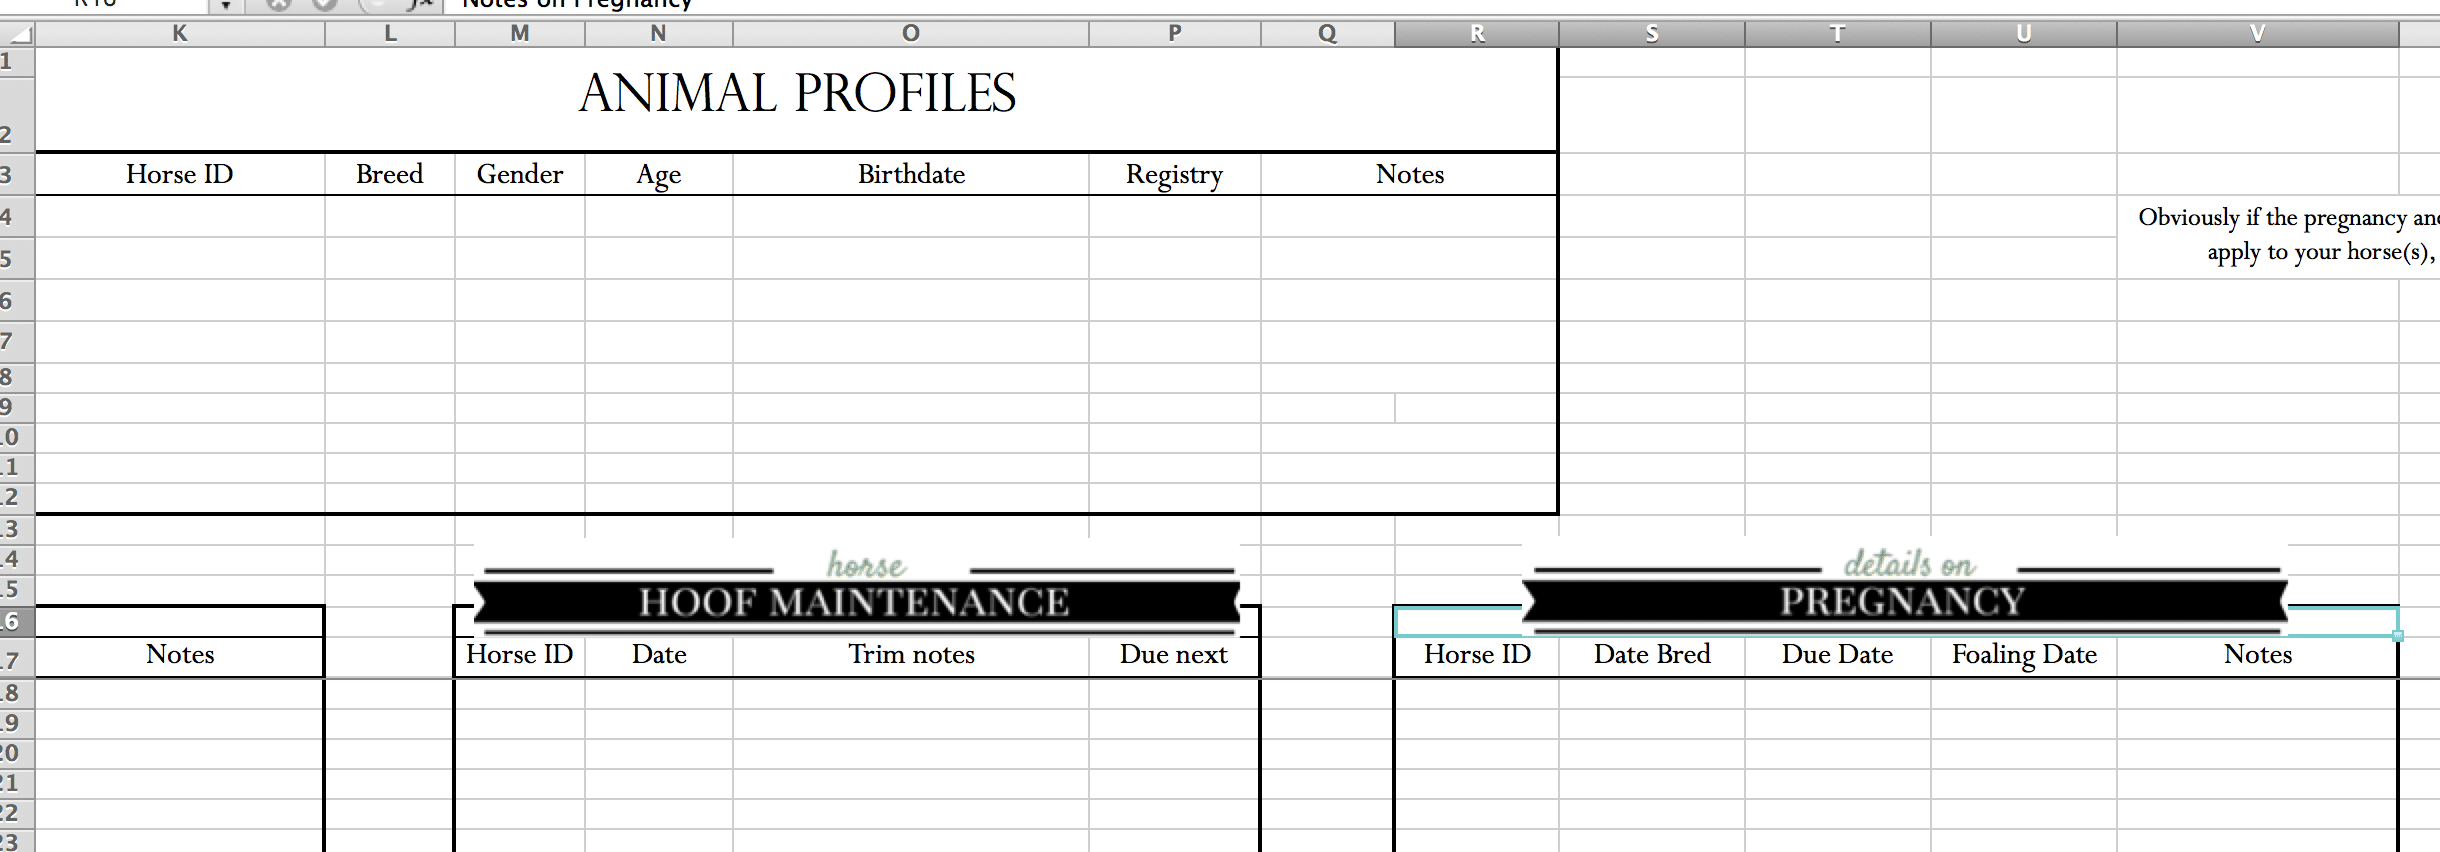 Medical Records Excel Template from longbournfarm.com